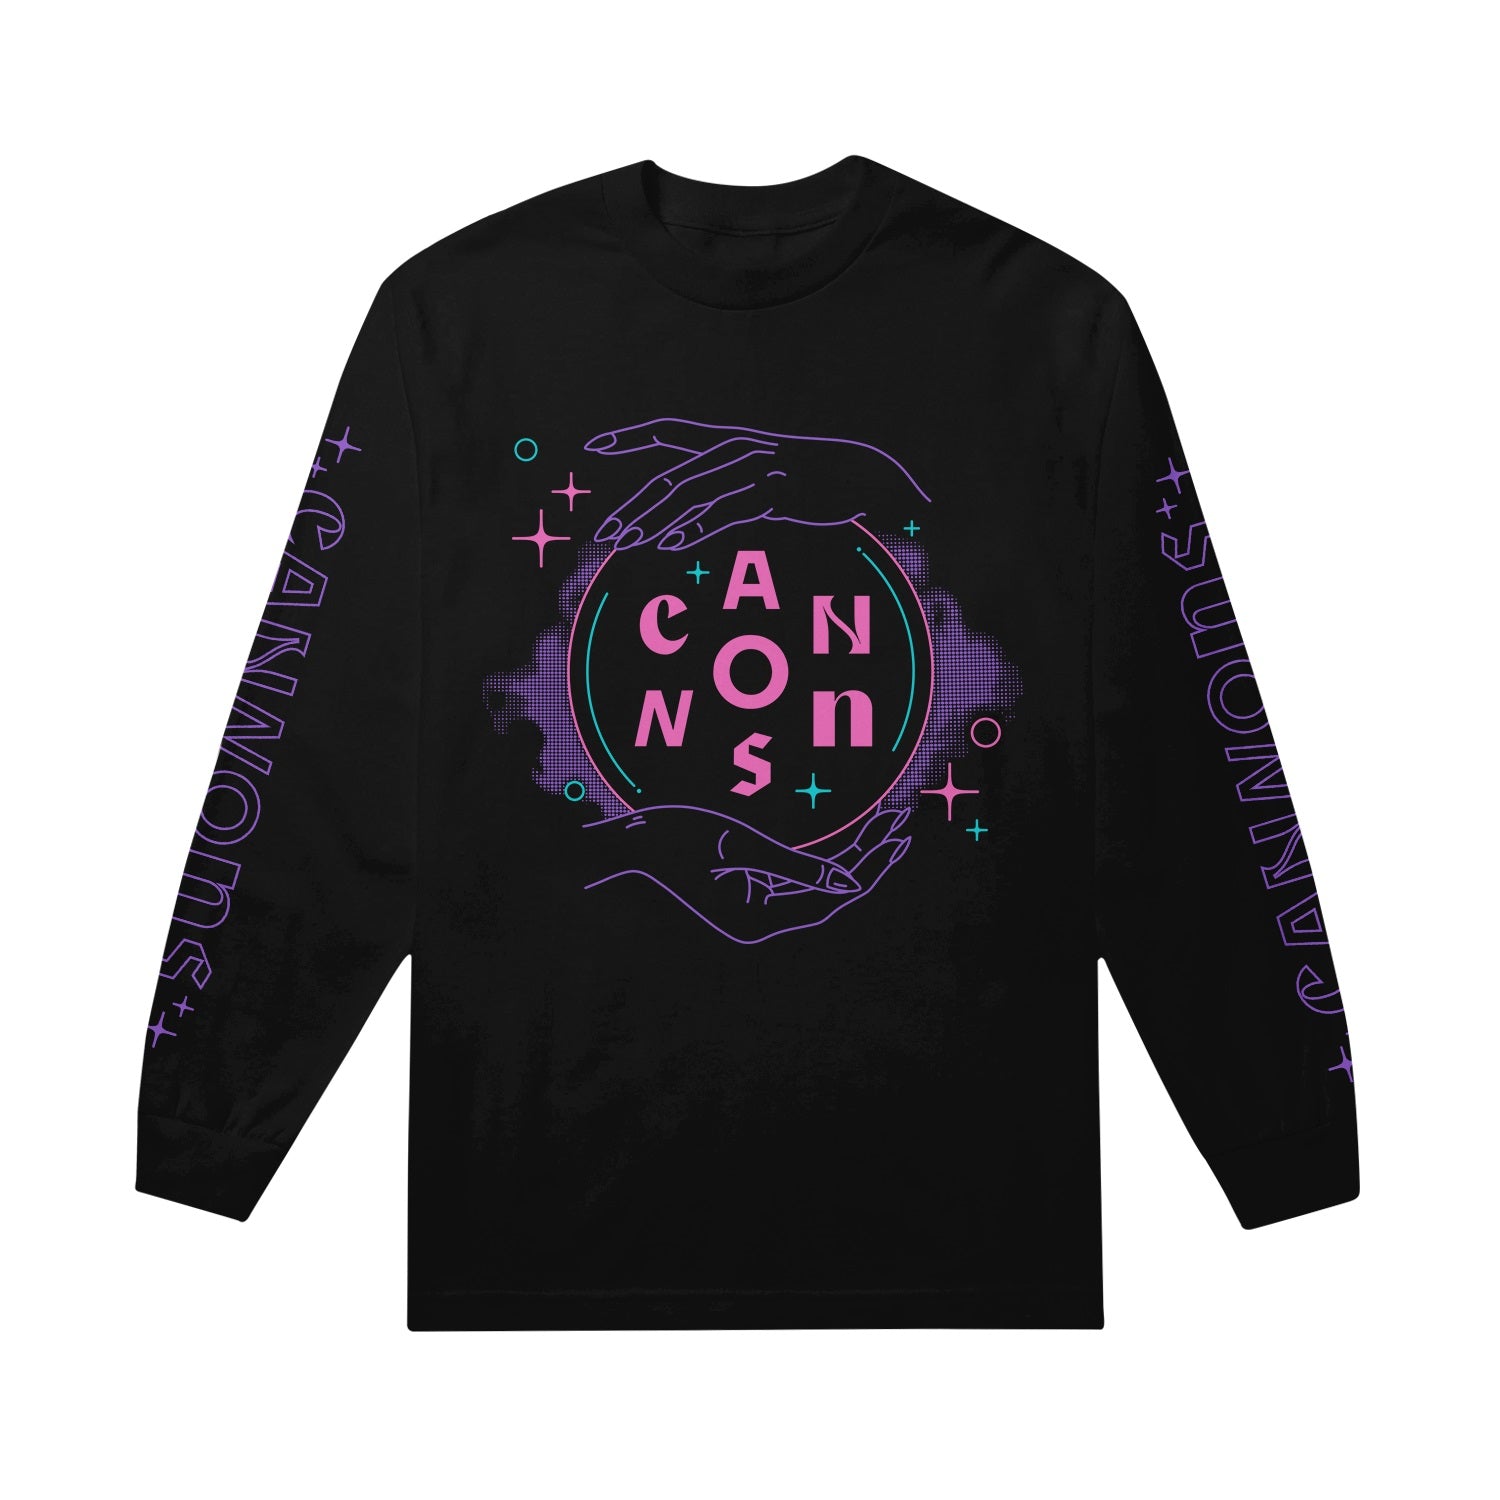 Image of a black longsleeve on a white background. The front of the long-sleeve features two purple hands on a crystal ball, with pink letters spelling out the word cannons. There are pink and green stars and circles around the design and a purple cloud aura behind and around the crystal ball. On the sleeves in purple there are stars and it says Cannons in outline writing with no fill.